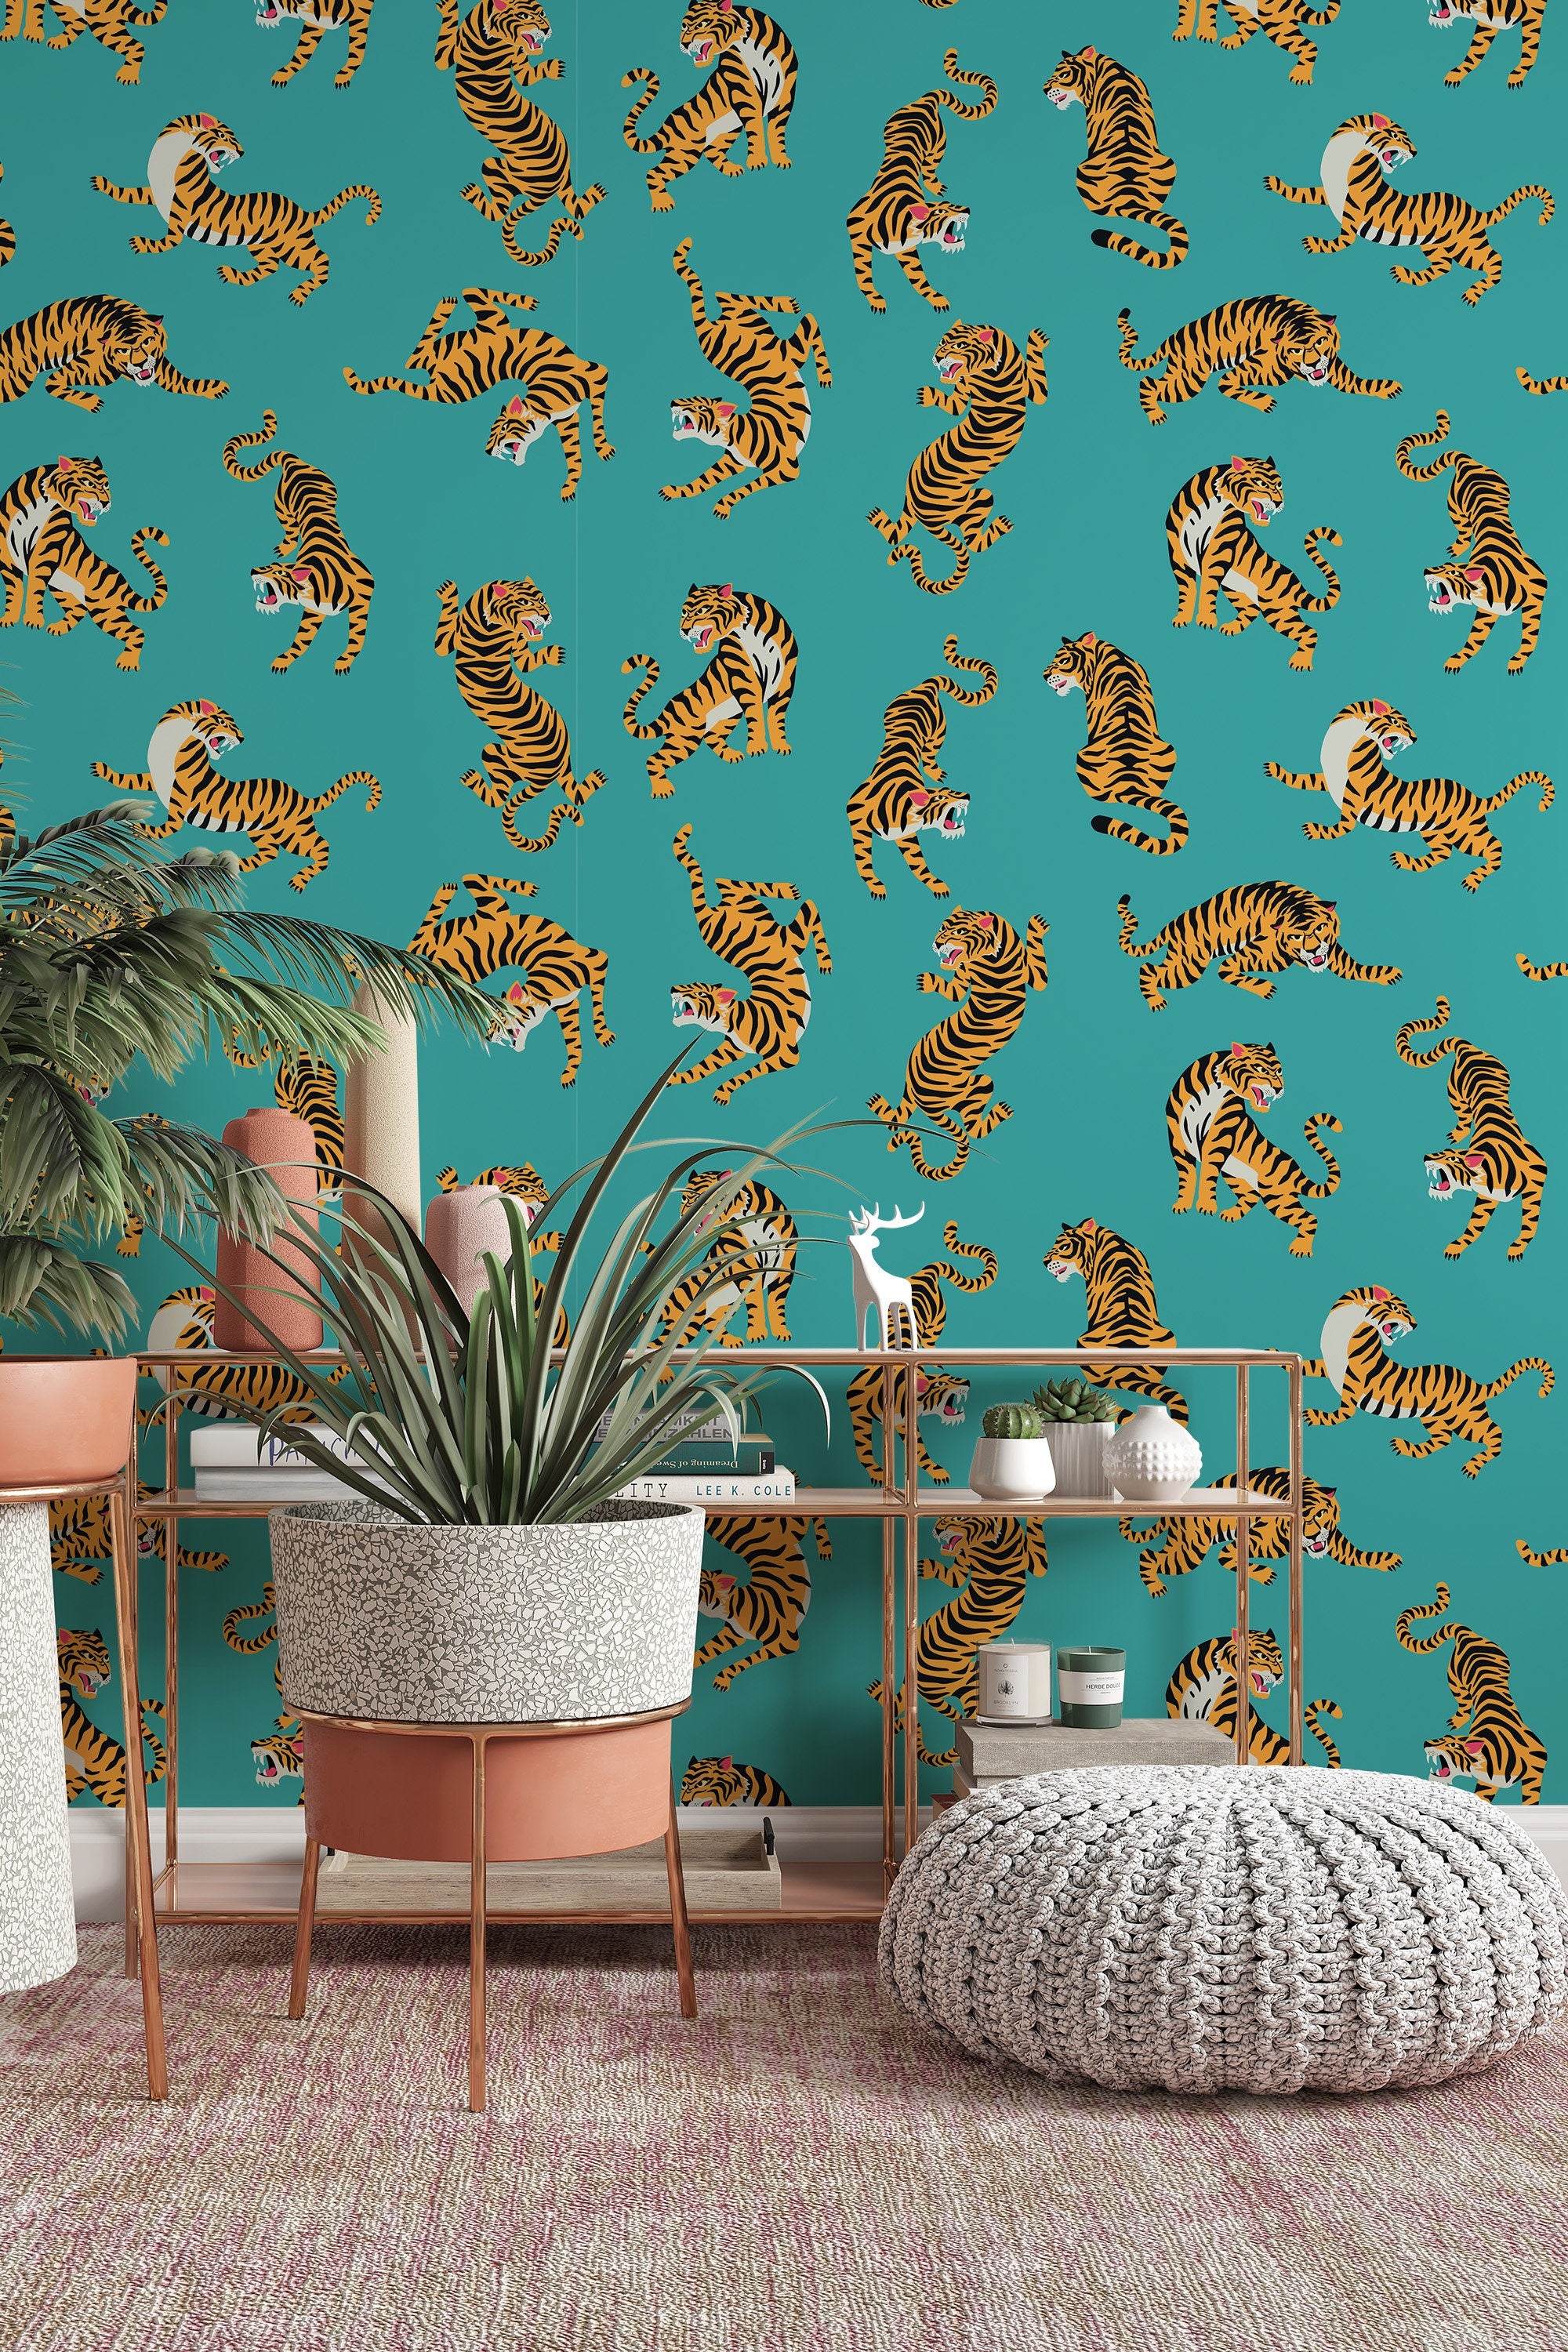 NuWallpaper Summer Love Teal Vinyl Peel  Stick Washable Wallpaper Roll  Covers 3075 Sq Ft NU3037  The Home Depot